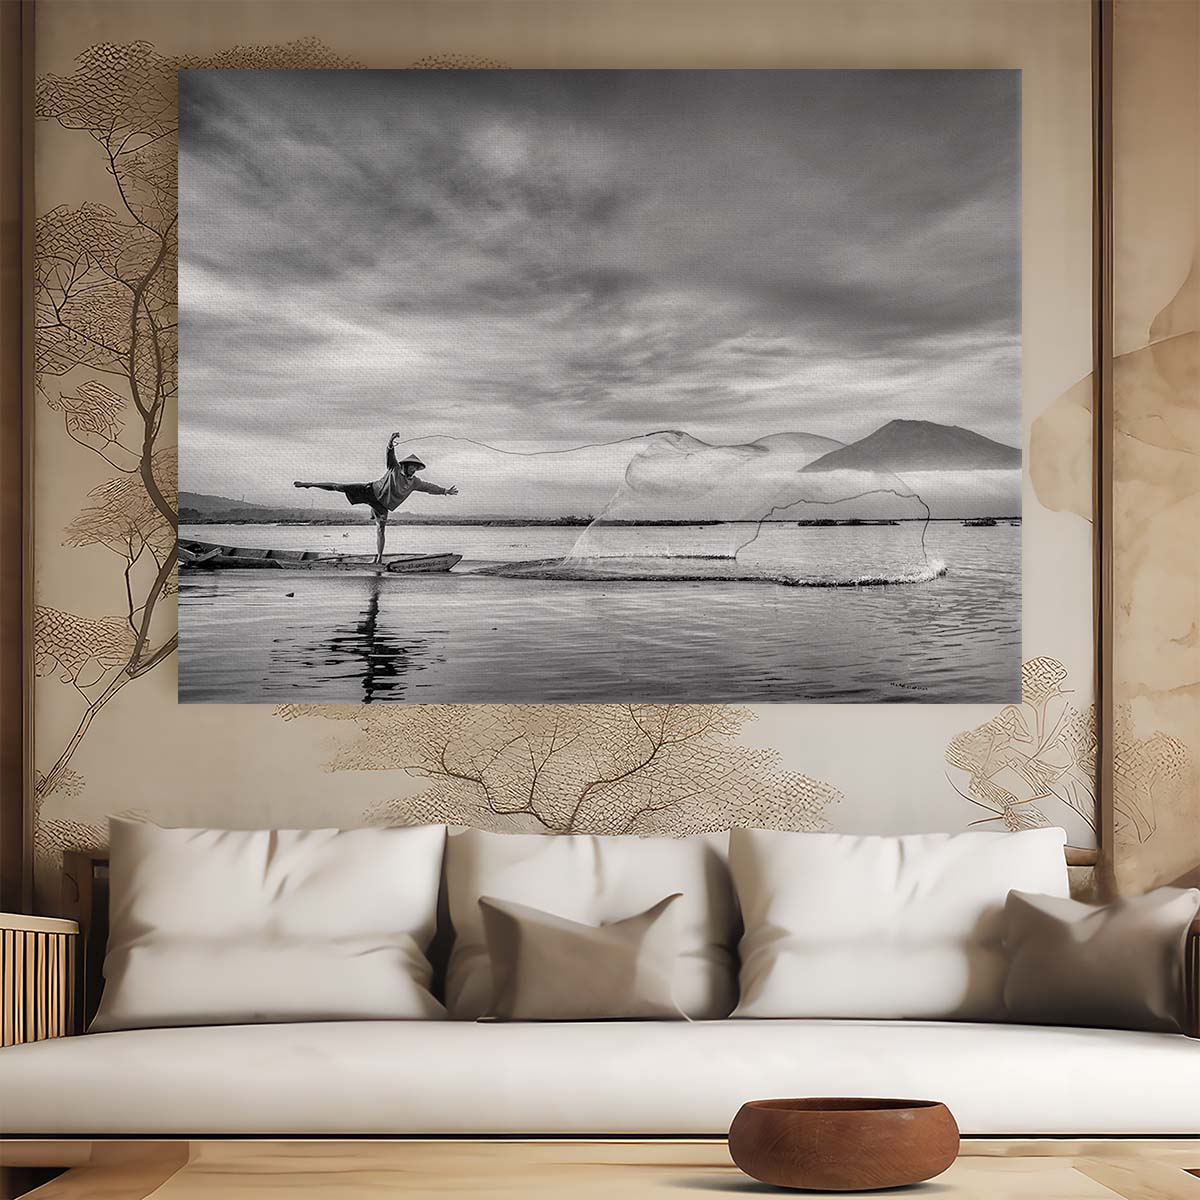 Sacred Fisherman's Balance Monochrome Lake Wall Art by Luxuriance Designs. Made in USA.